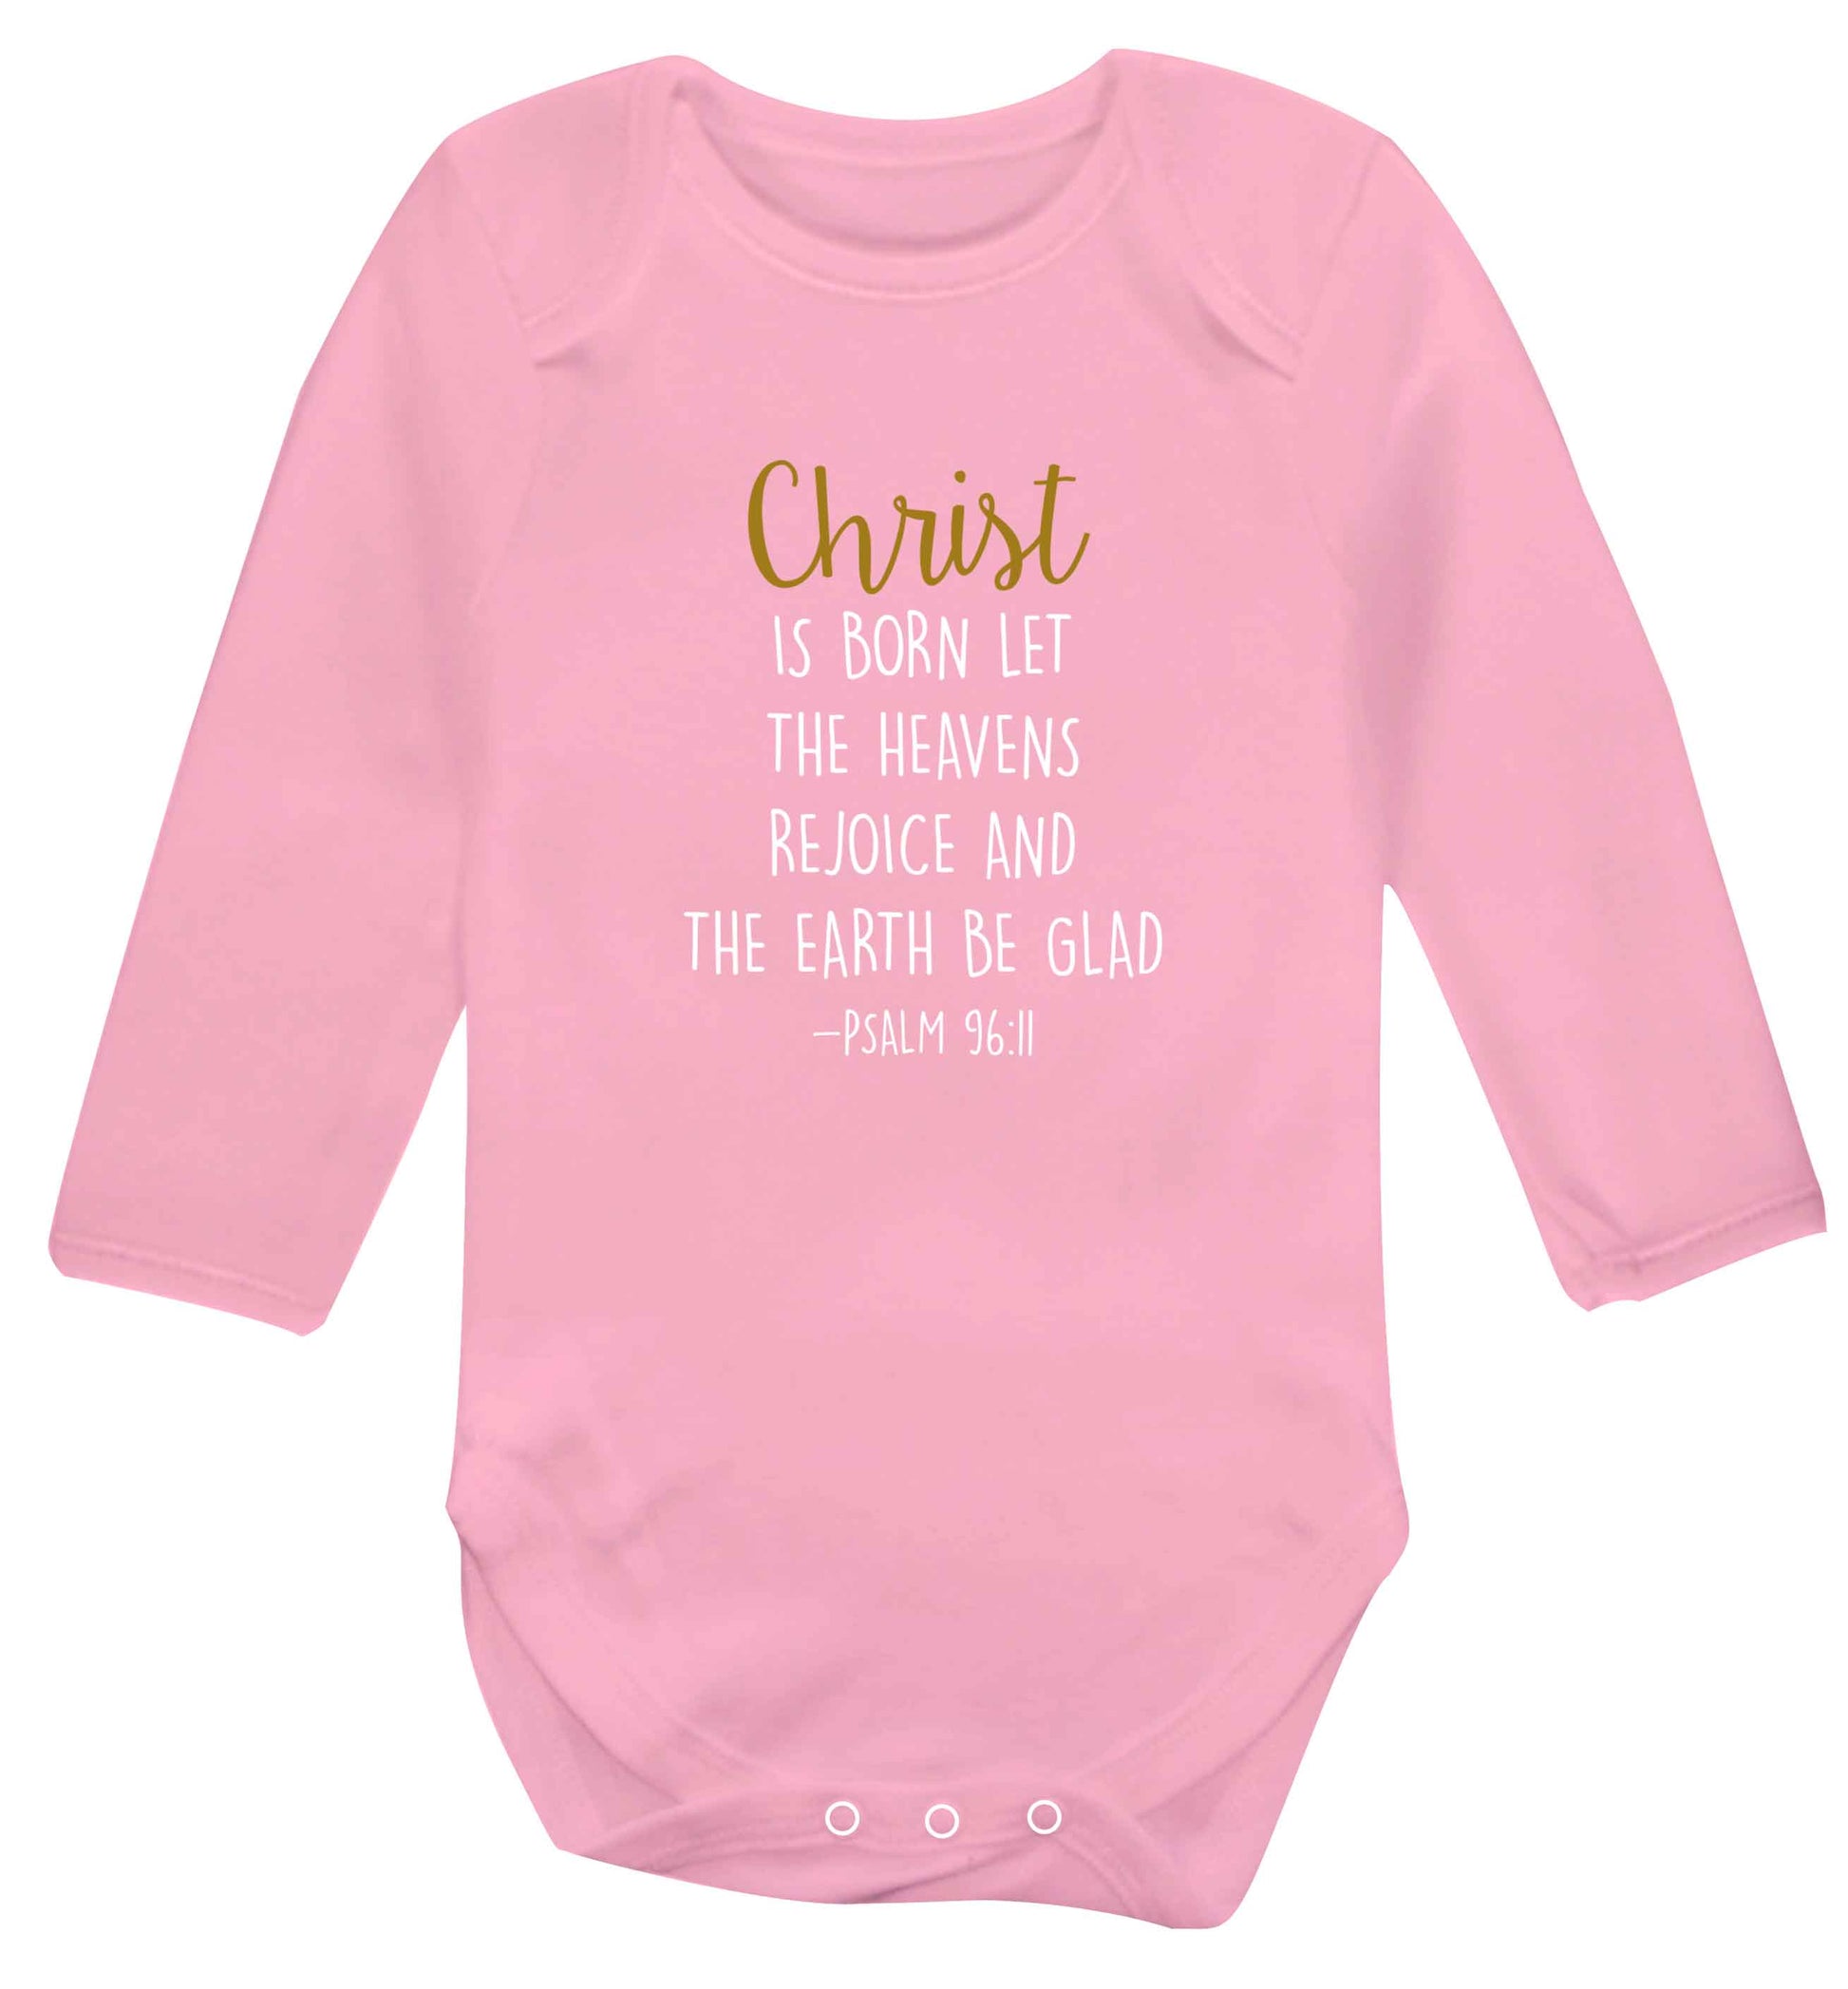 Christ is Born Psalm 96:11 baby vest long sleeved pale pink 6-12 months